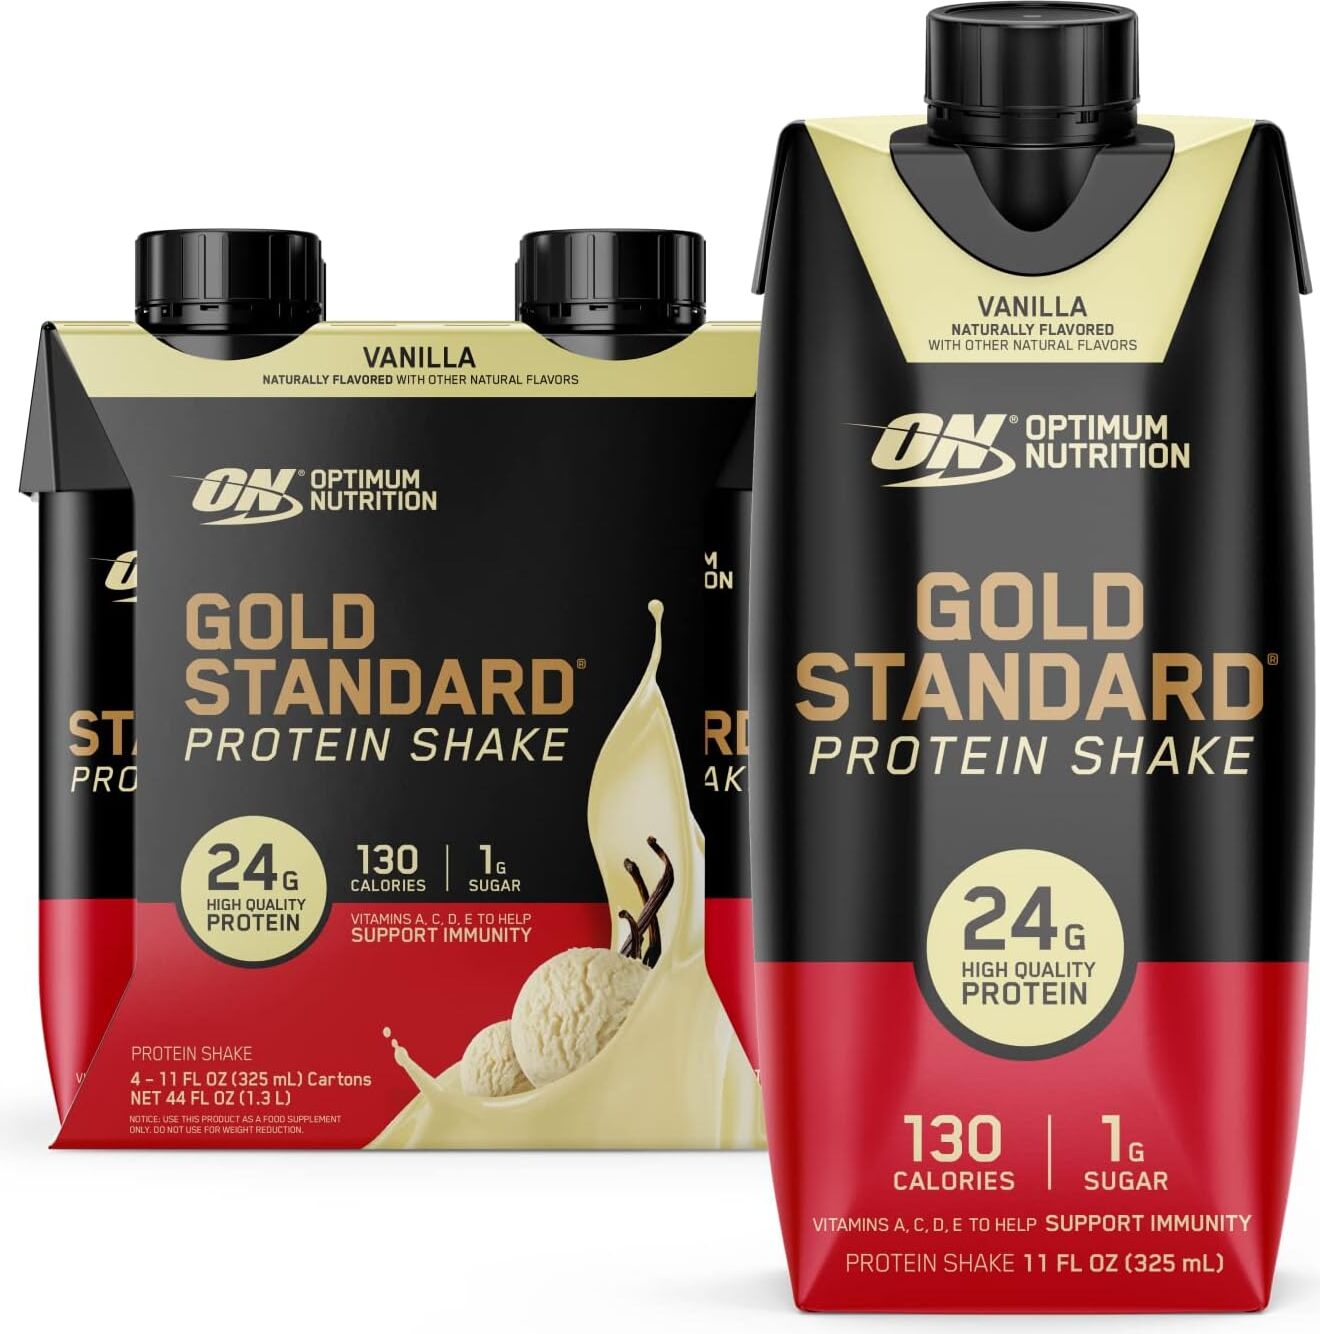 https://www.priceplow.com/static/images/products/optimum-nutrition-gold-standard-protein-shake.jpg